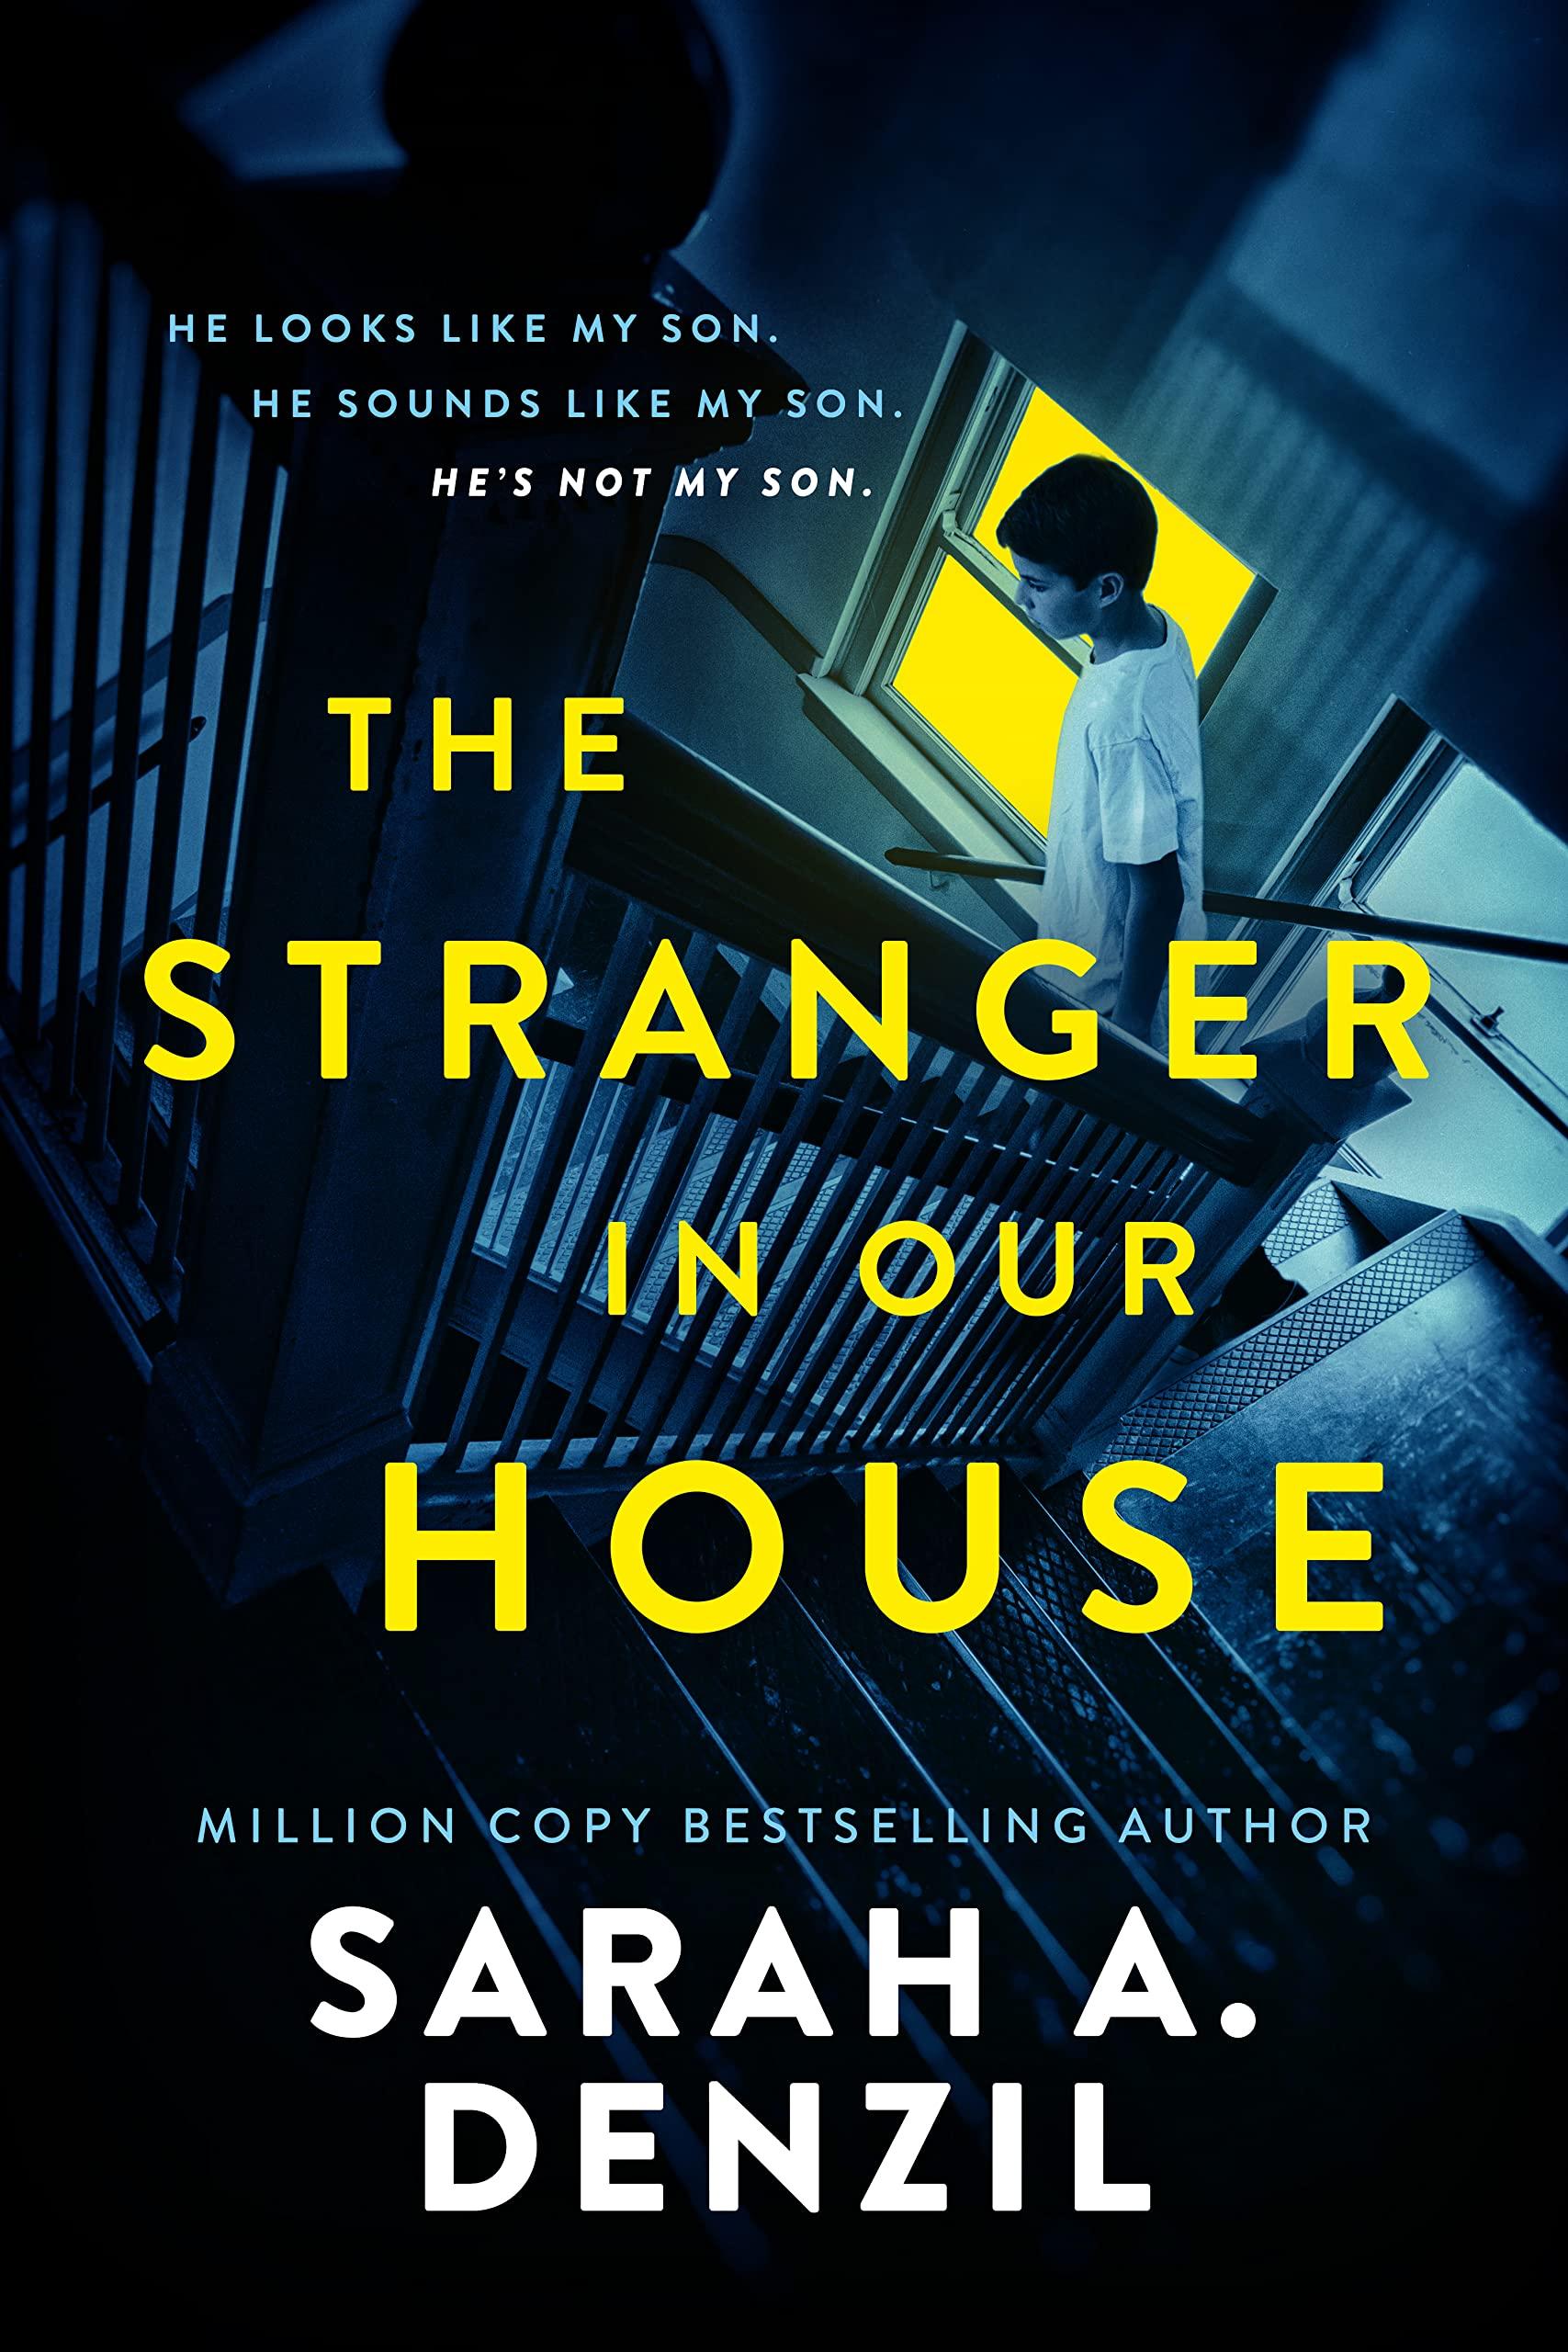 The Stranger in Our House